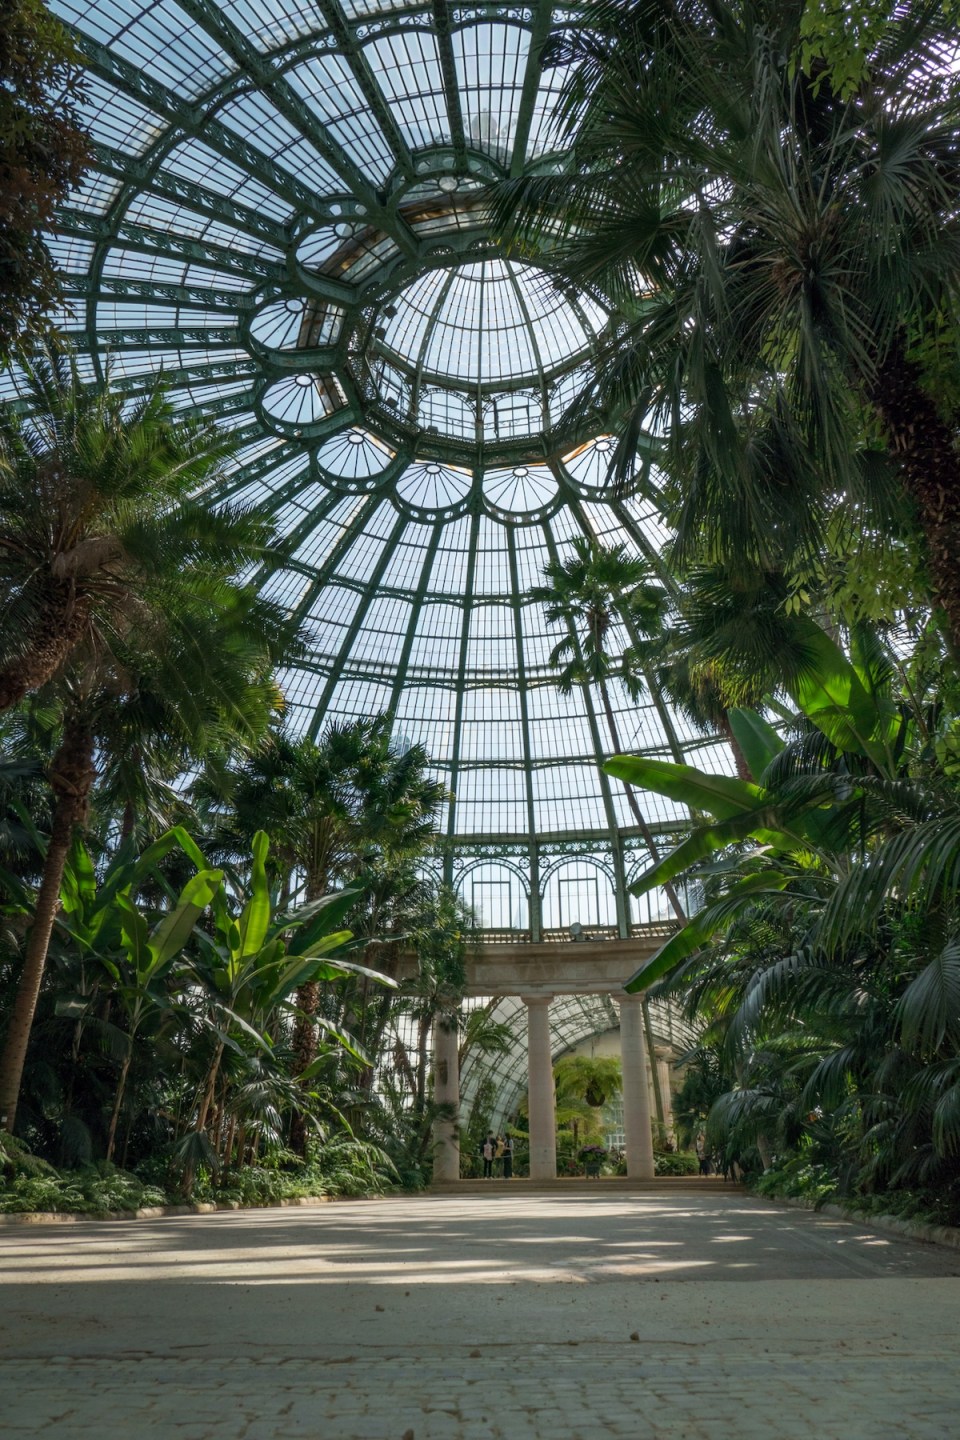 Classically styled greenhouses designed by Alphonse Balat in 1873 with pavilions, domes and galleries.